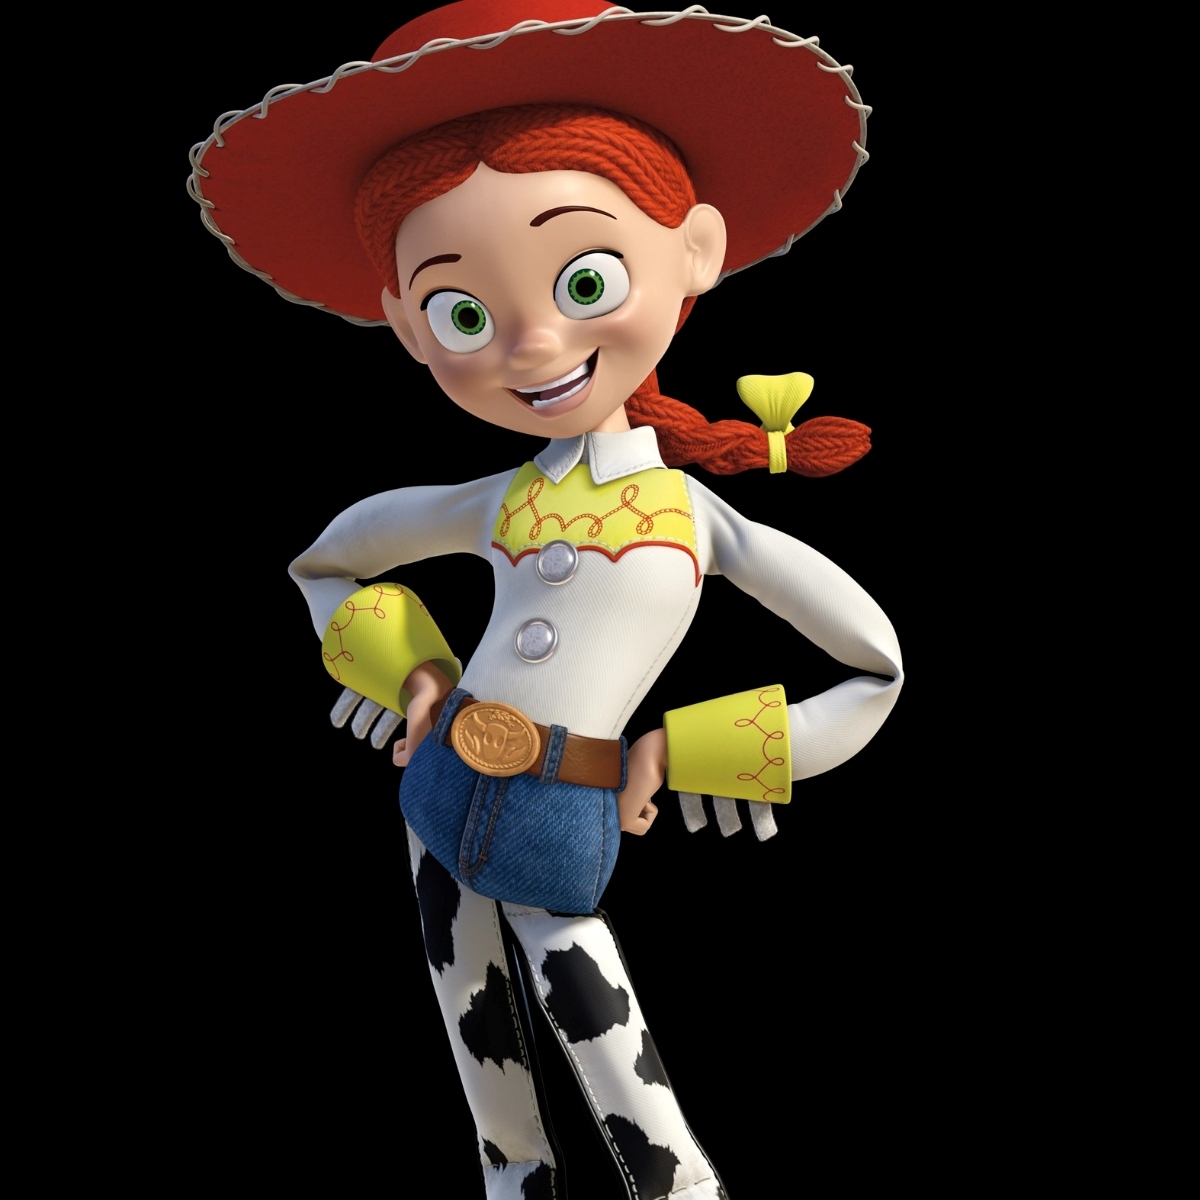 11 Facts About Jessie (Toy Story) - Facts.net